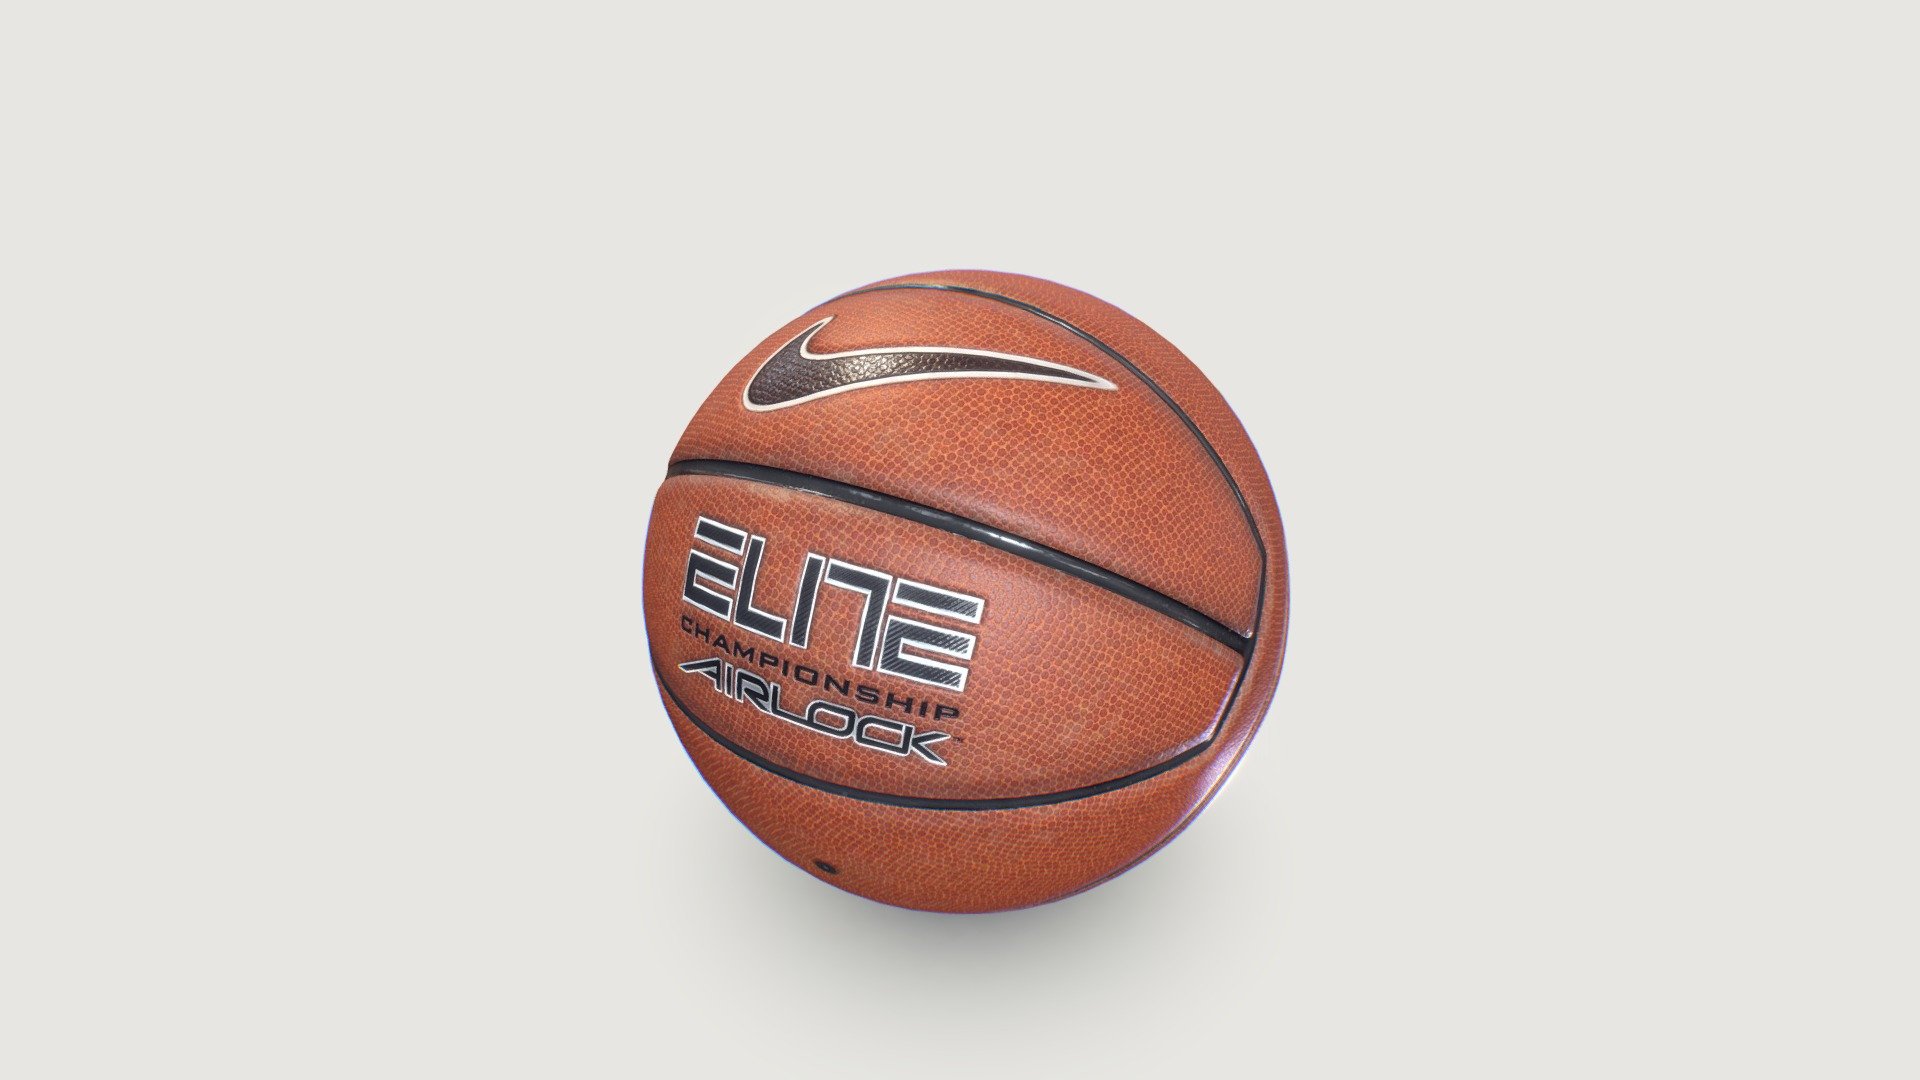 Madeled in Blender and textured with subatance painter with custom substance designer material.
Photorealistic PBR model optimised for game and other realtime applications.

get this basketball for your your game and VR project, or decorate your VR home! - Nike Elite Champion Airlock Basketball - Buy Royalty Free 3D model by twitte_king 3d model